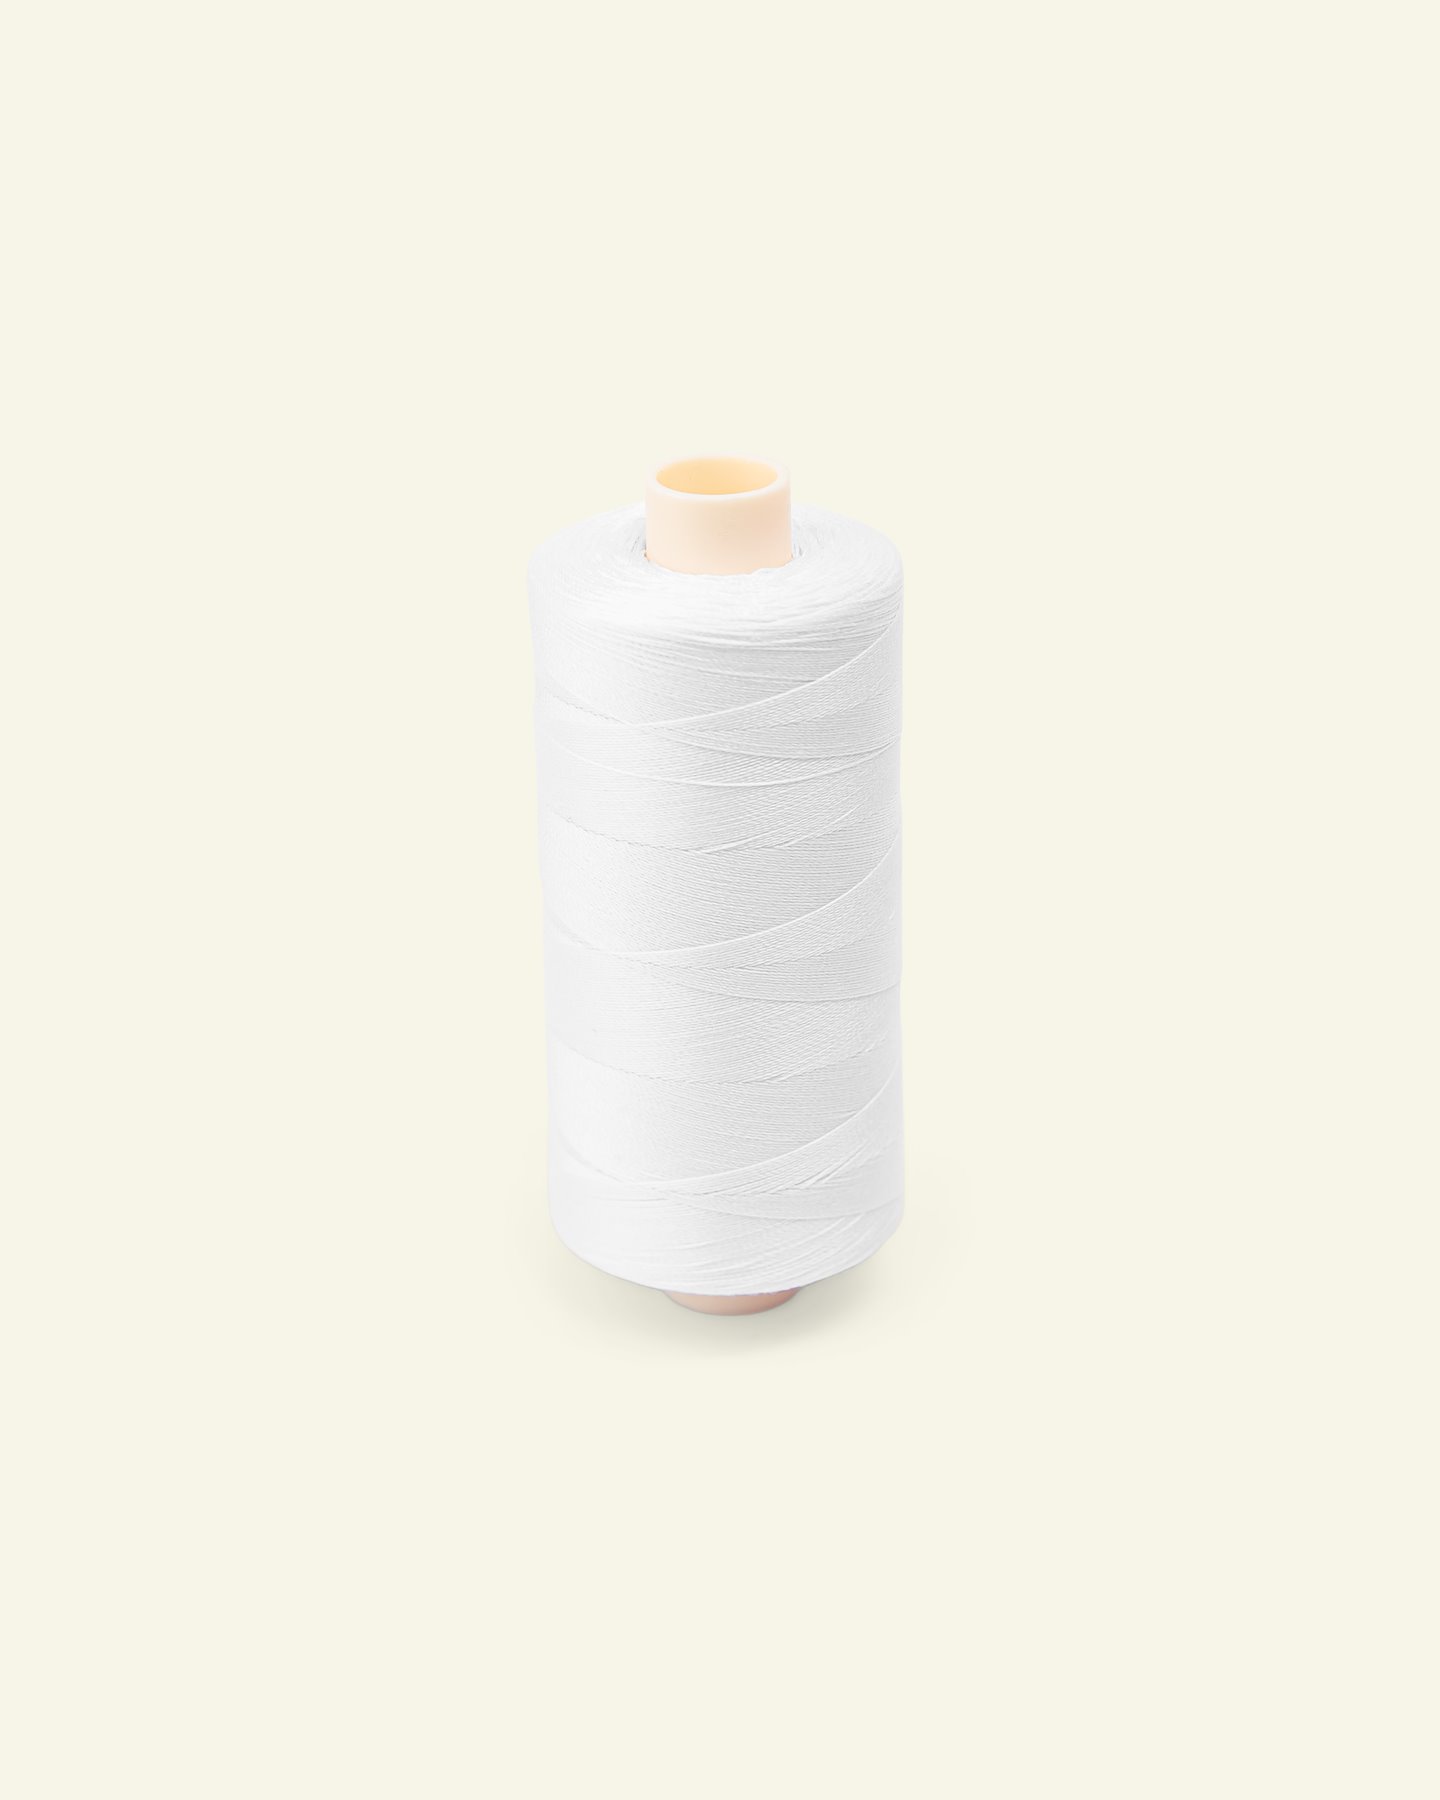 Sewing thread cotton white 1000m 14001_pack